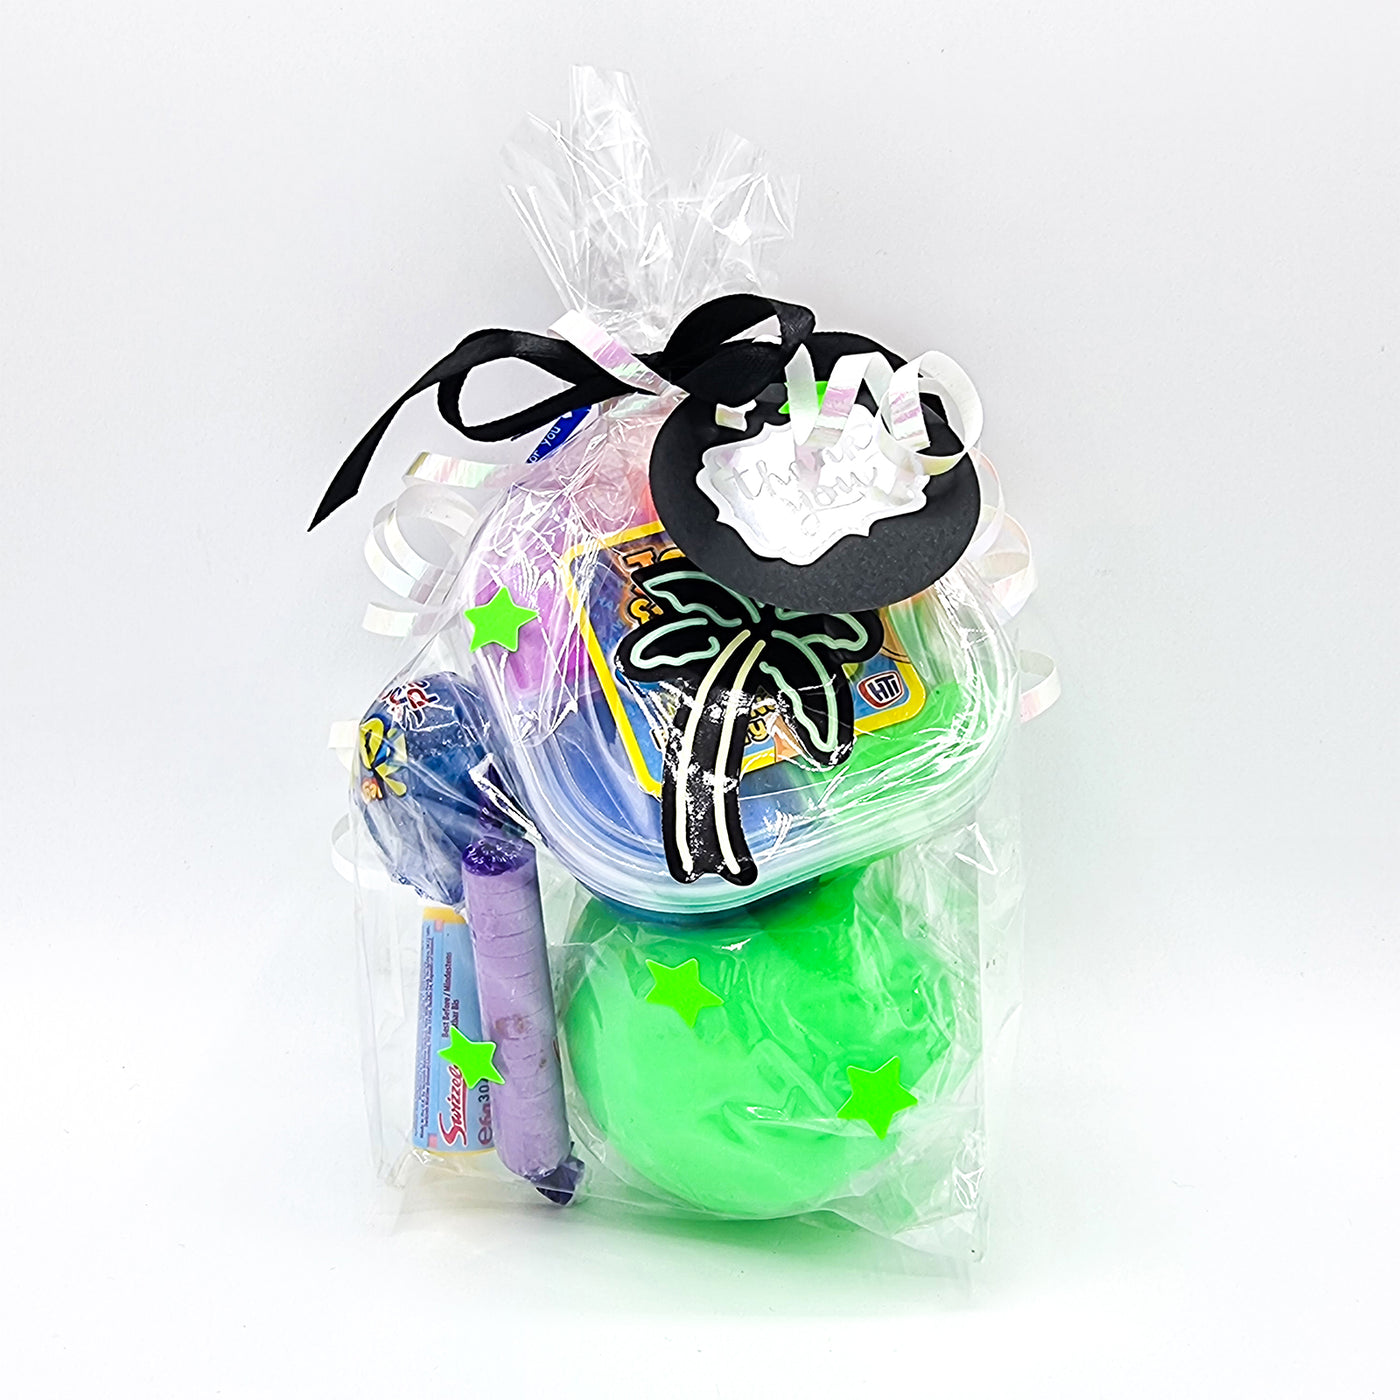 Neon Birthday Party Favours For Boys And Girls With Neon Treats And Candy.